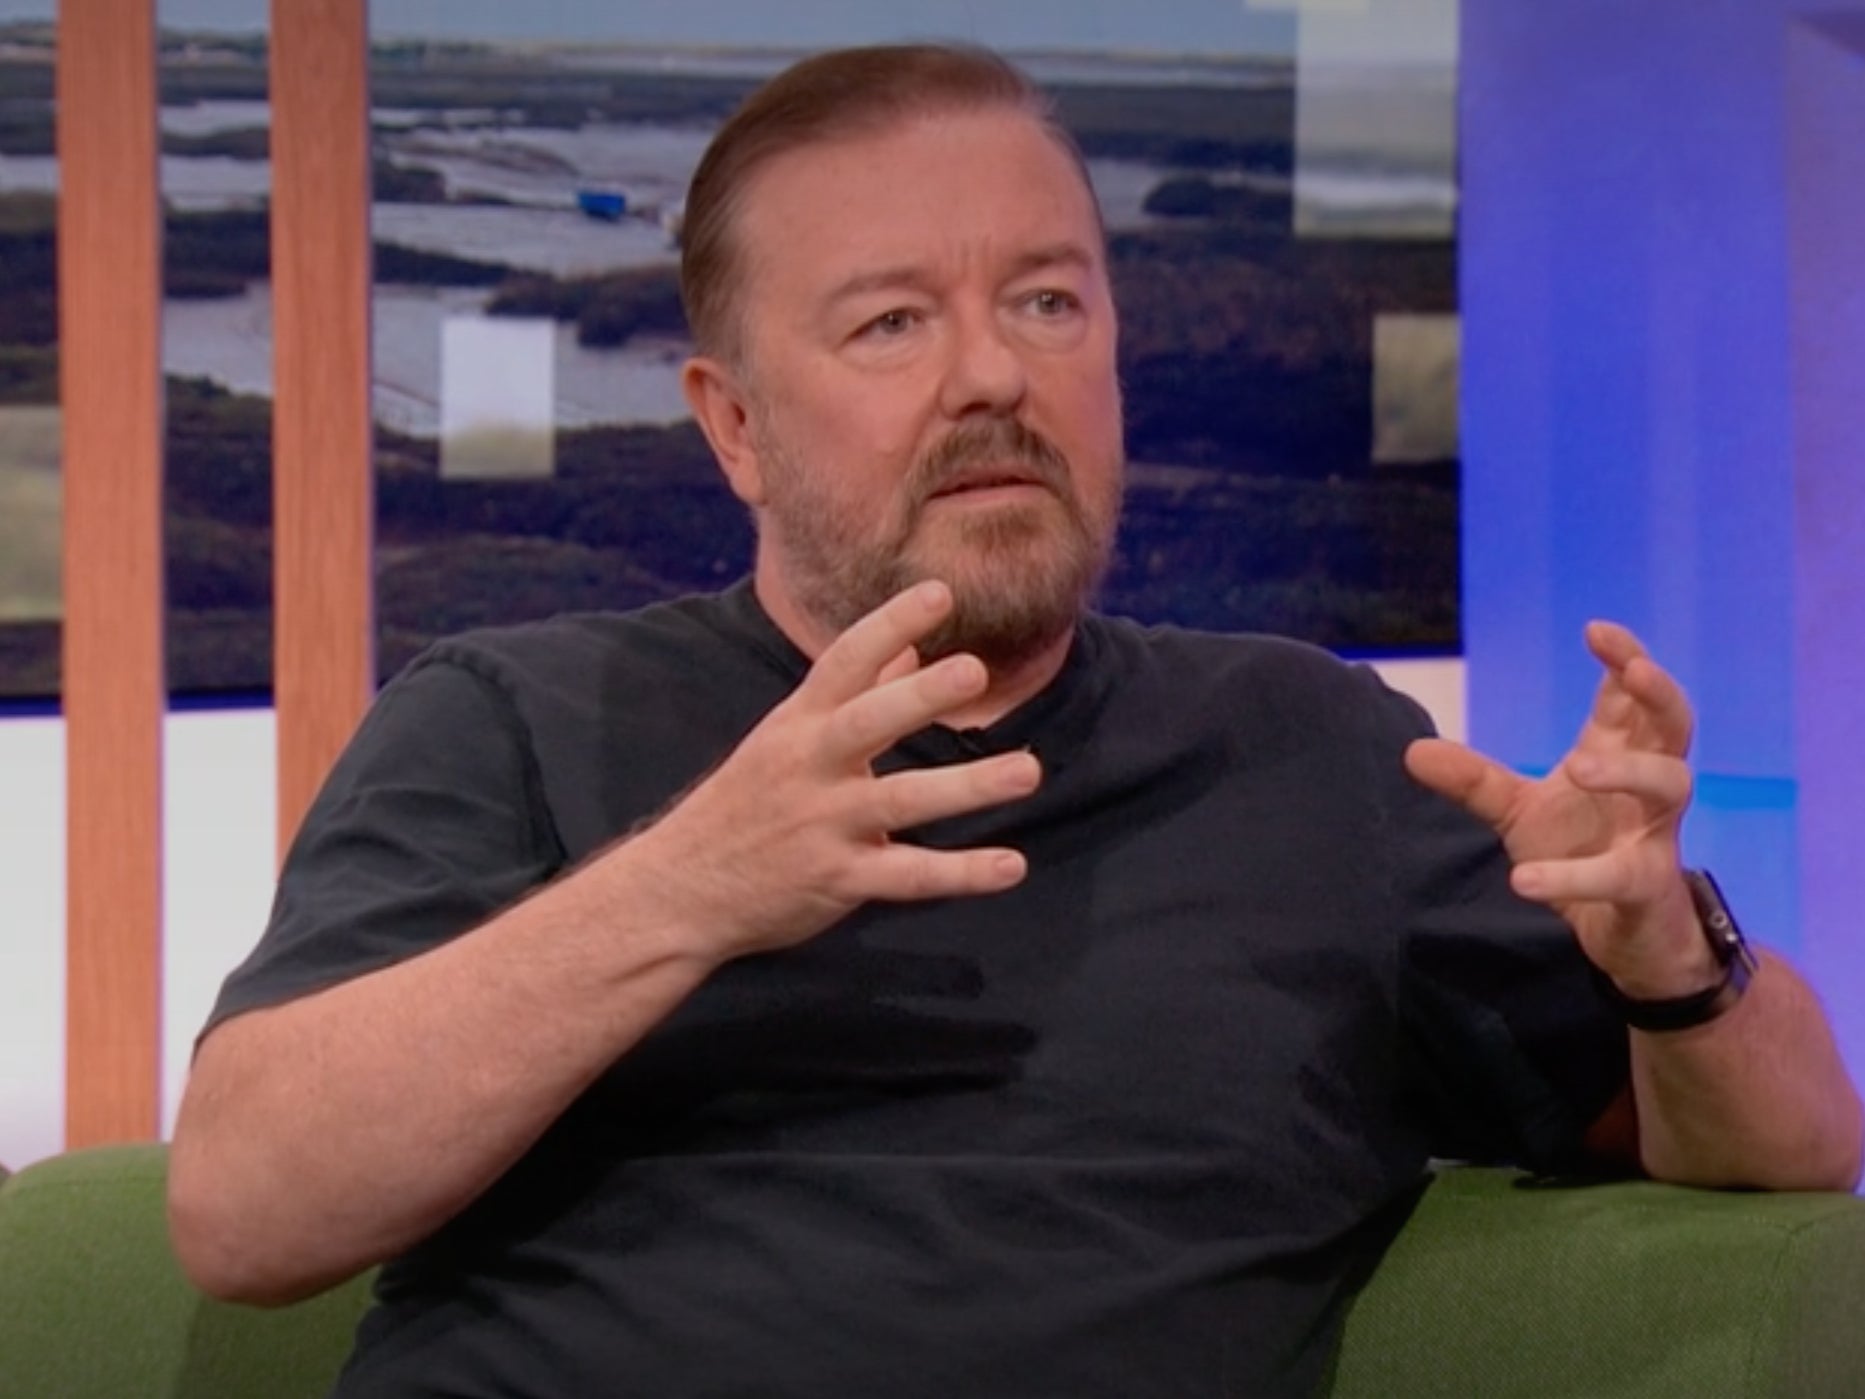 Gervais explained his stance on ‘The One Show'